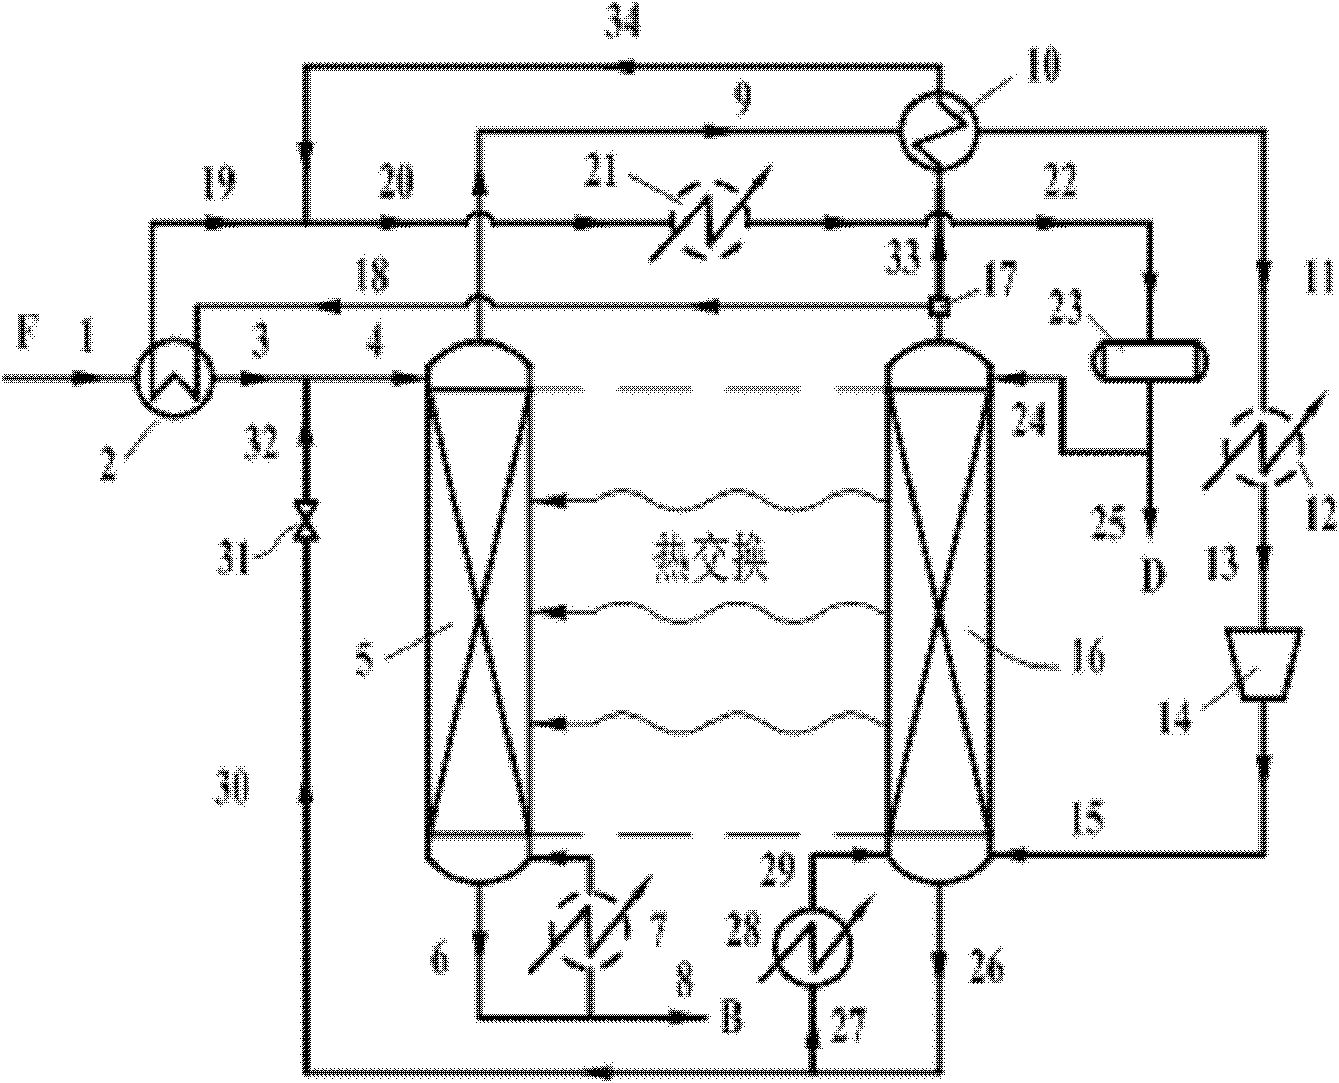 Rectifying section tower bottom reboiling internal heat-integrated energy-saving rectifying apparatus and method